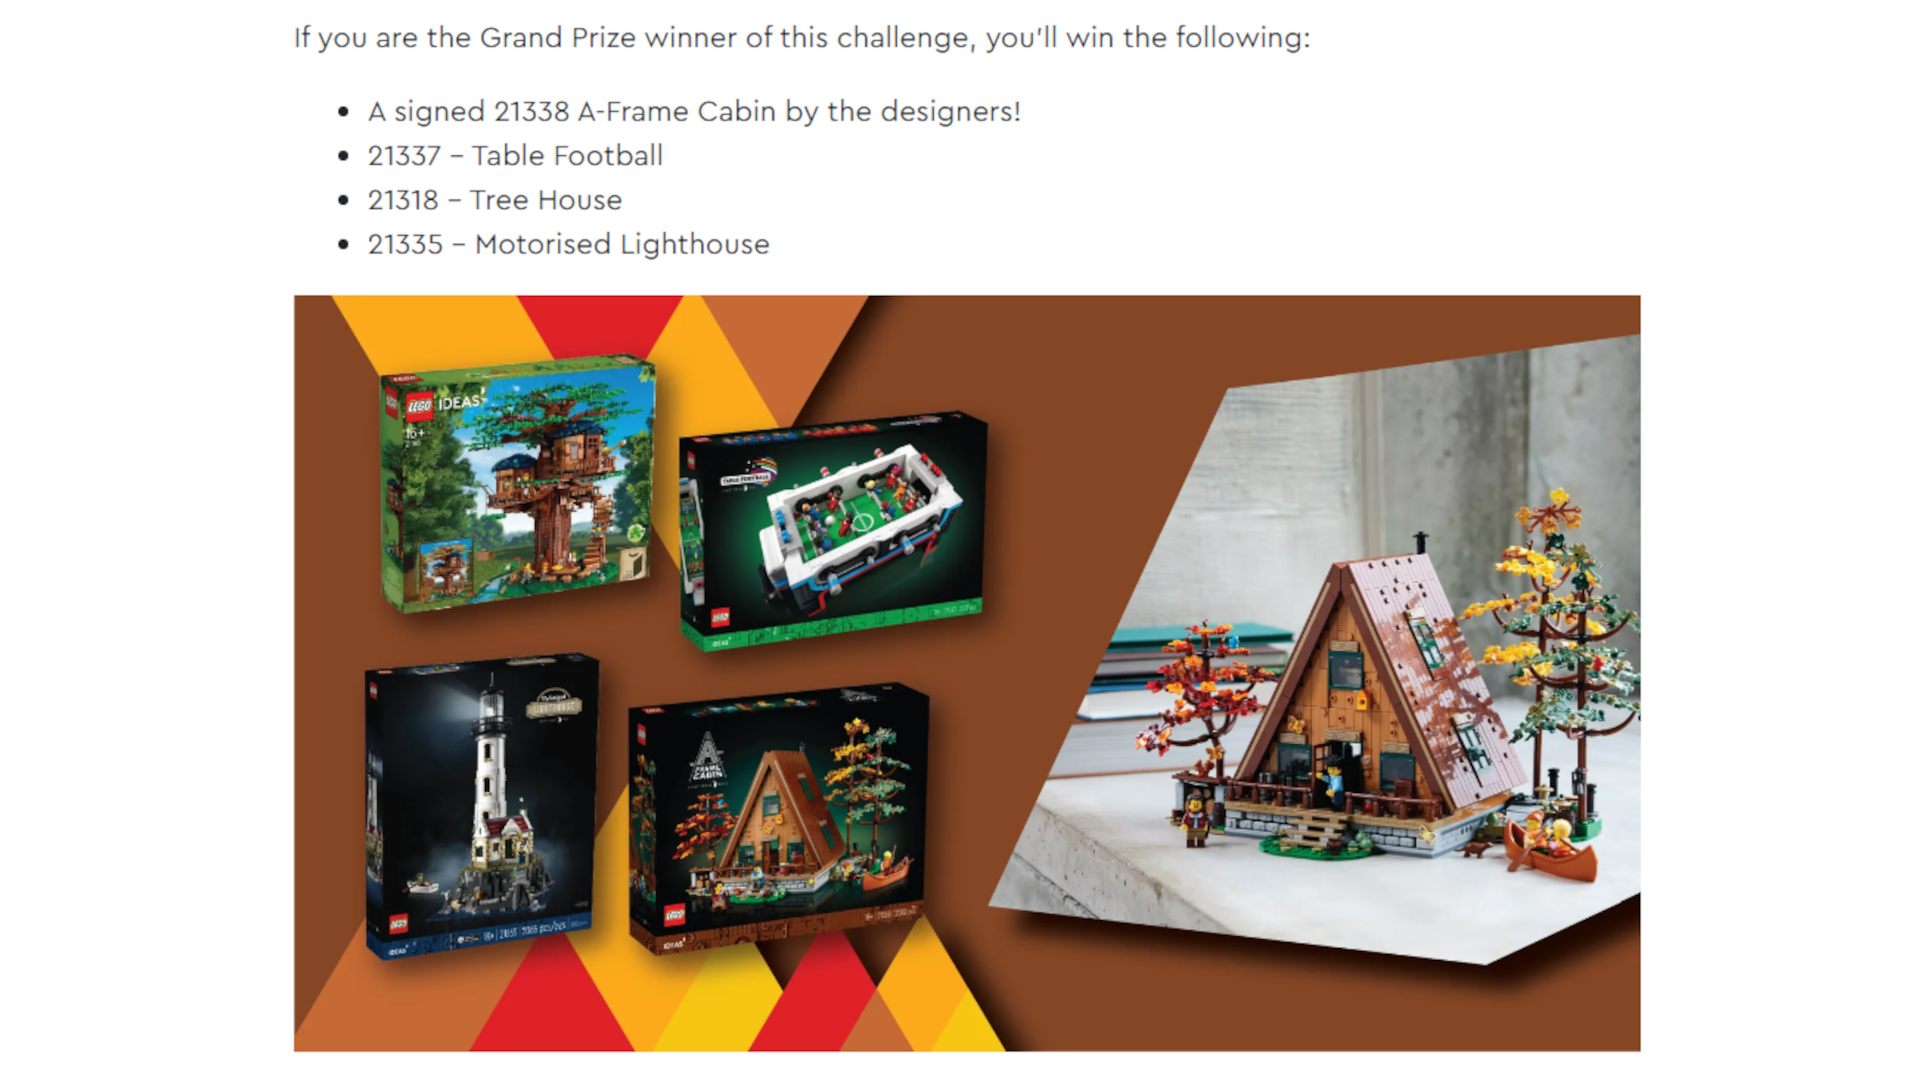 The different prizes for the LEGO Ideas Challenge A-Frame Cabin are shown.